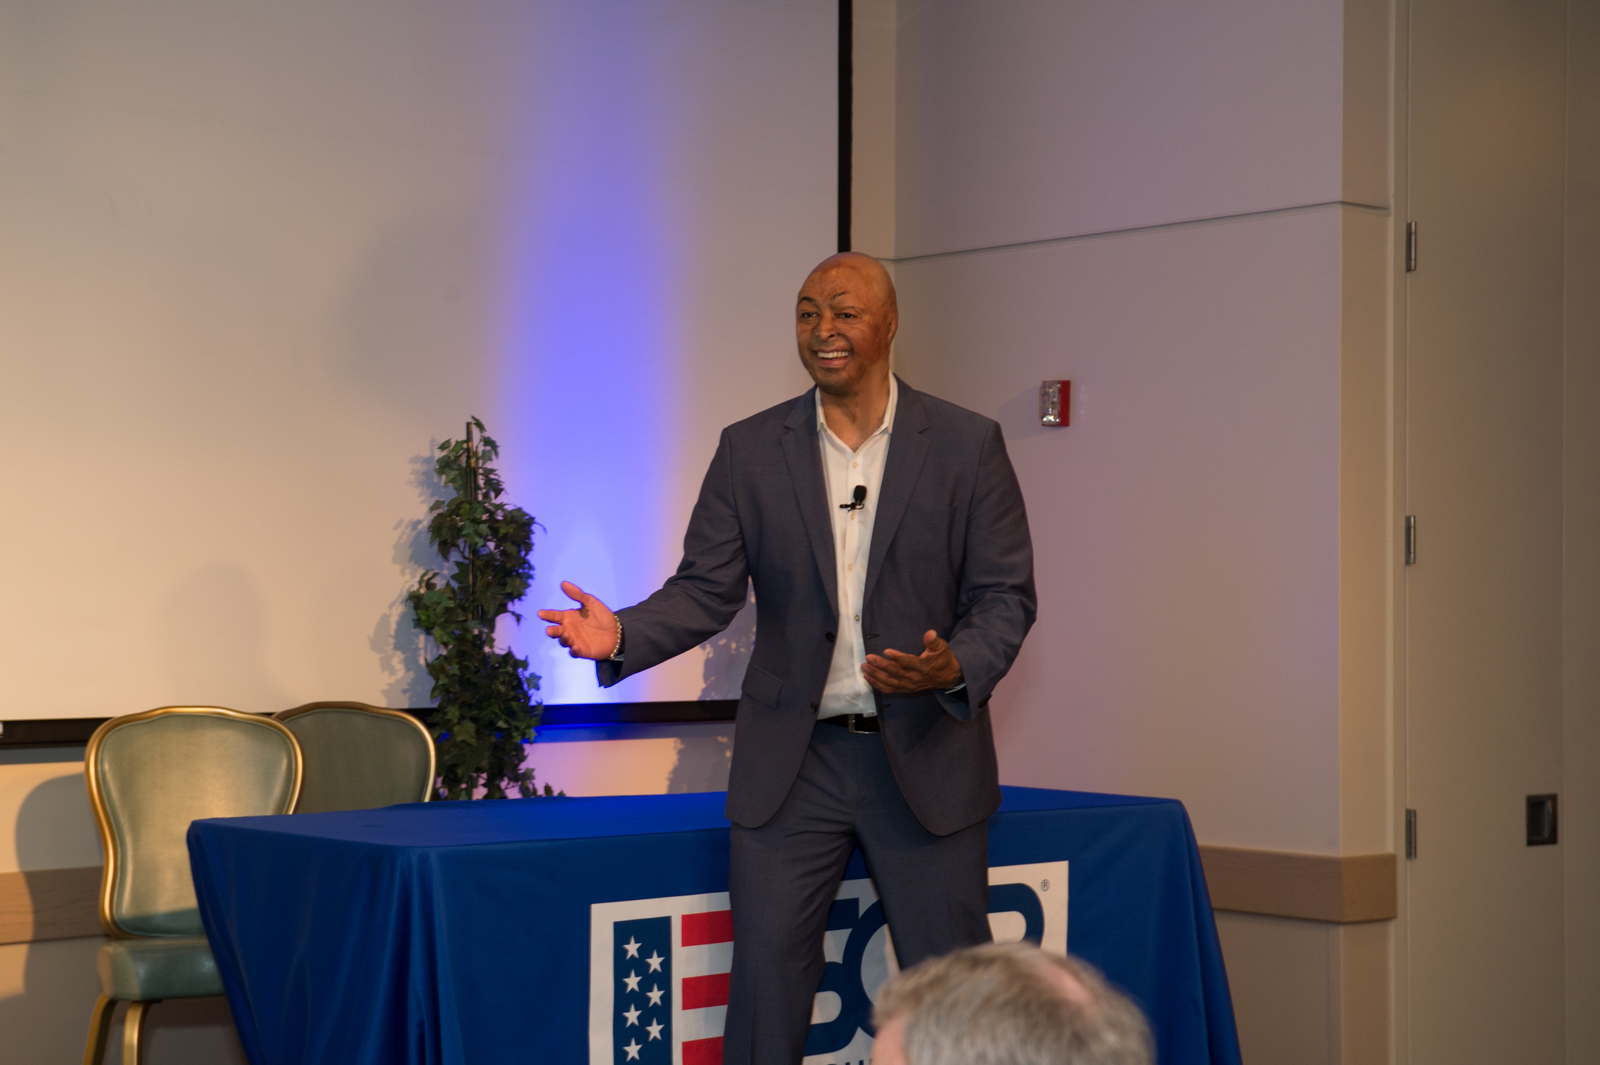 Bestselling author, actor and wounded army veteran, J.R. Martinez spoke to a crowd of approximately 225 guests during the 3rd Annual Power of Inclusion Cenference at Loma Linda University Health